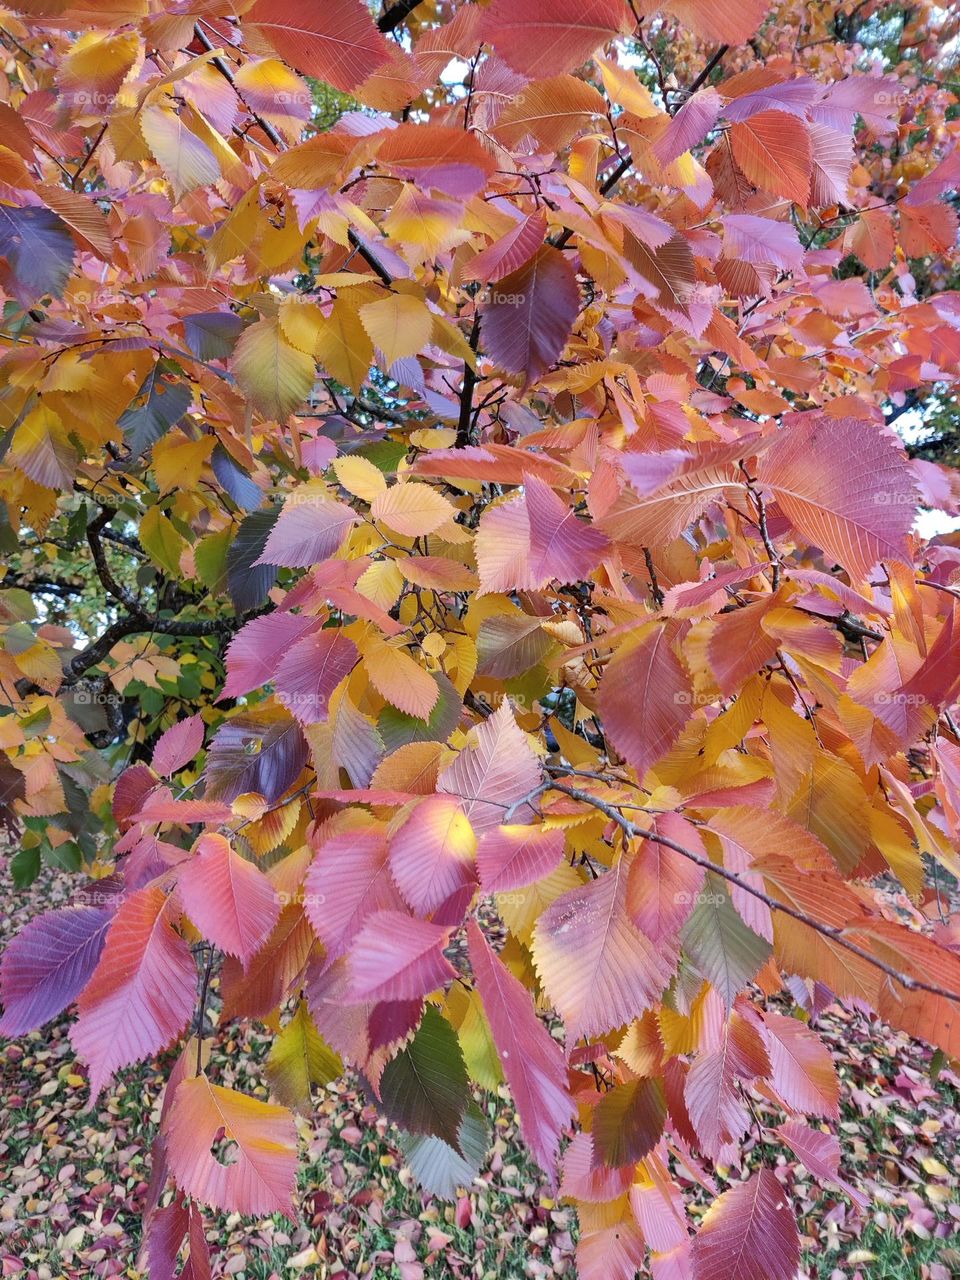 Random color leaves in autumn